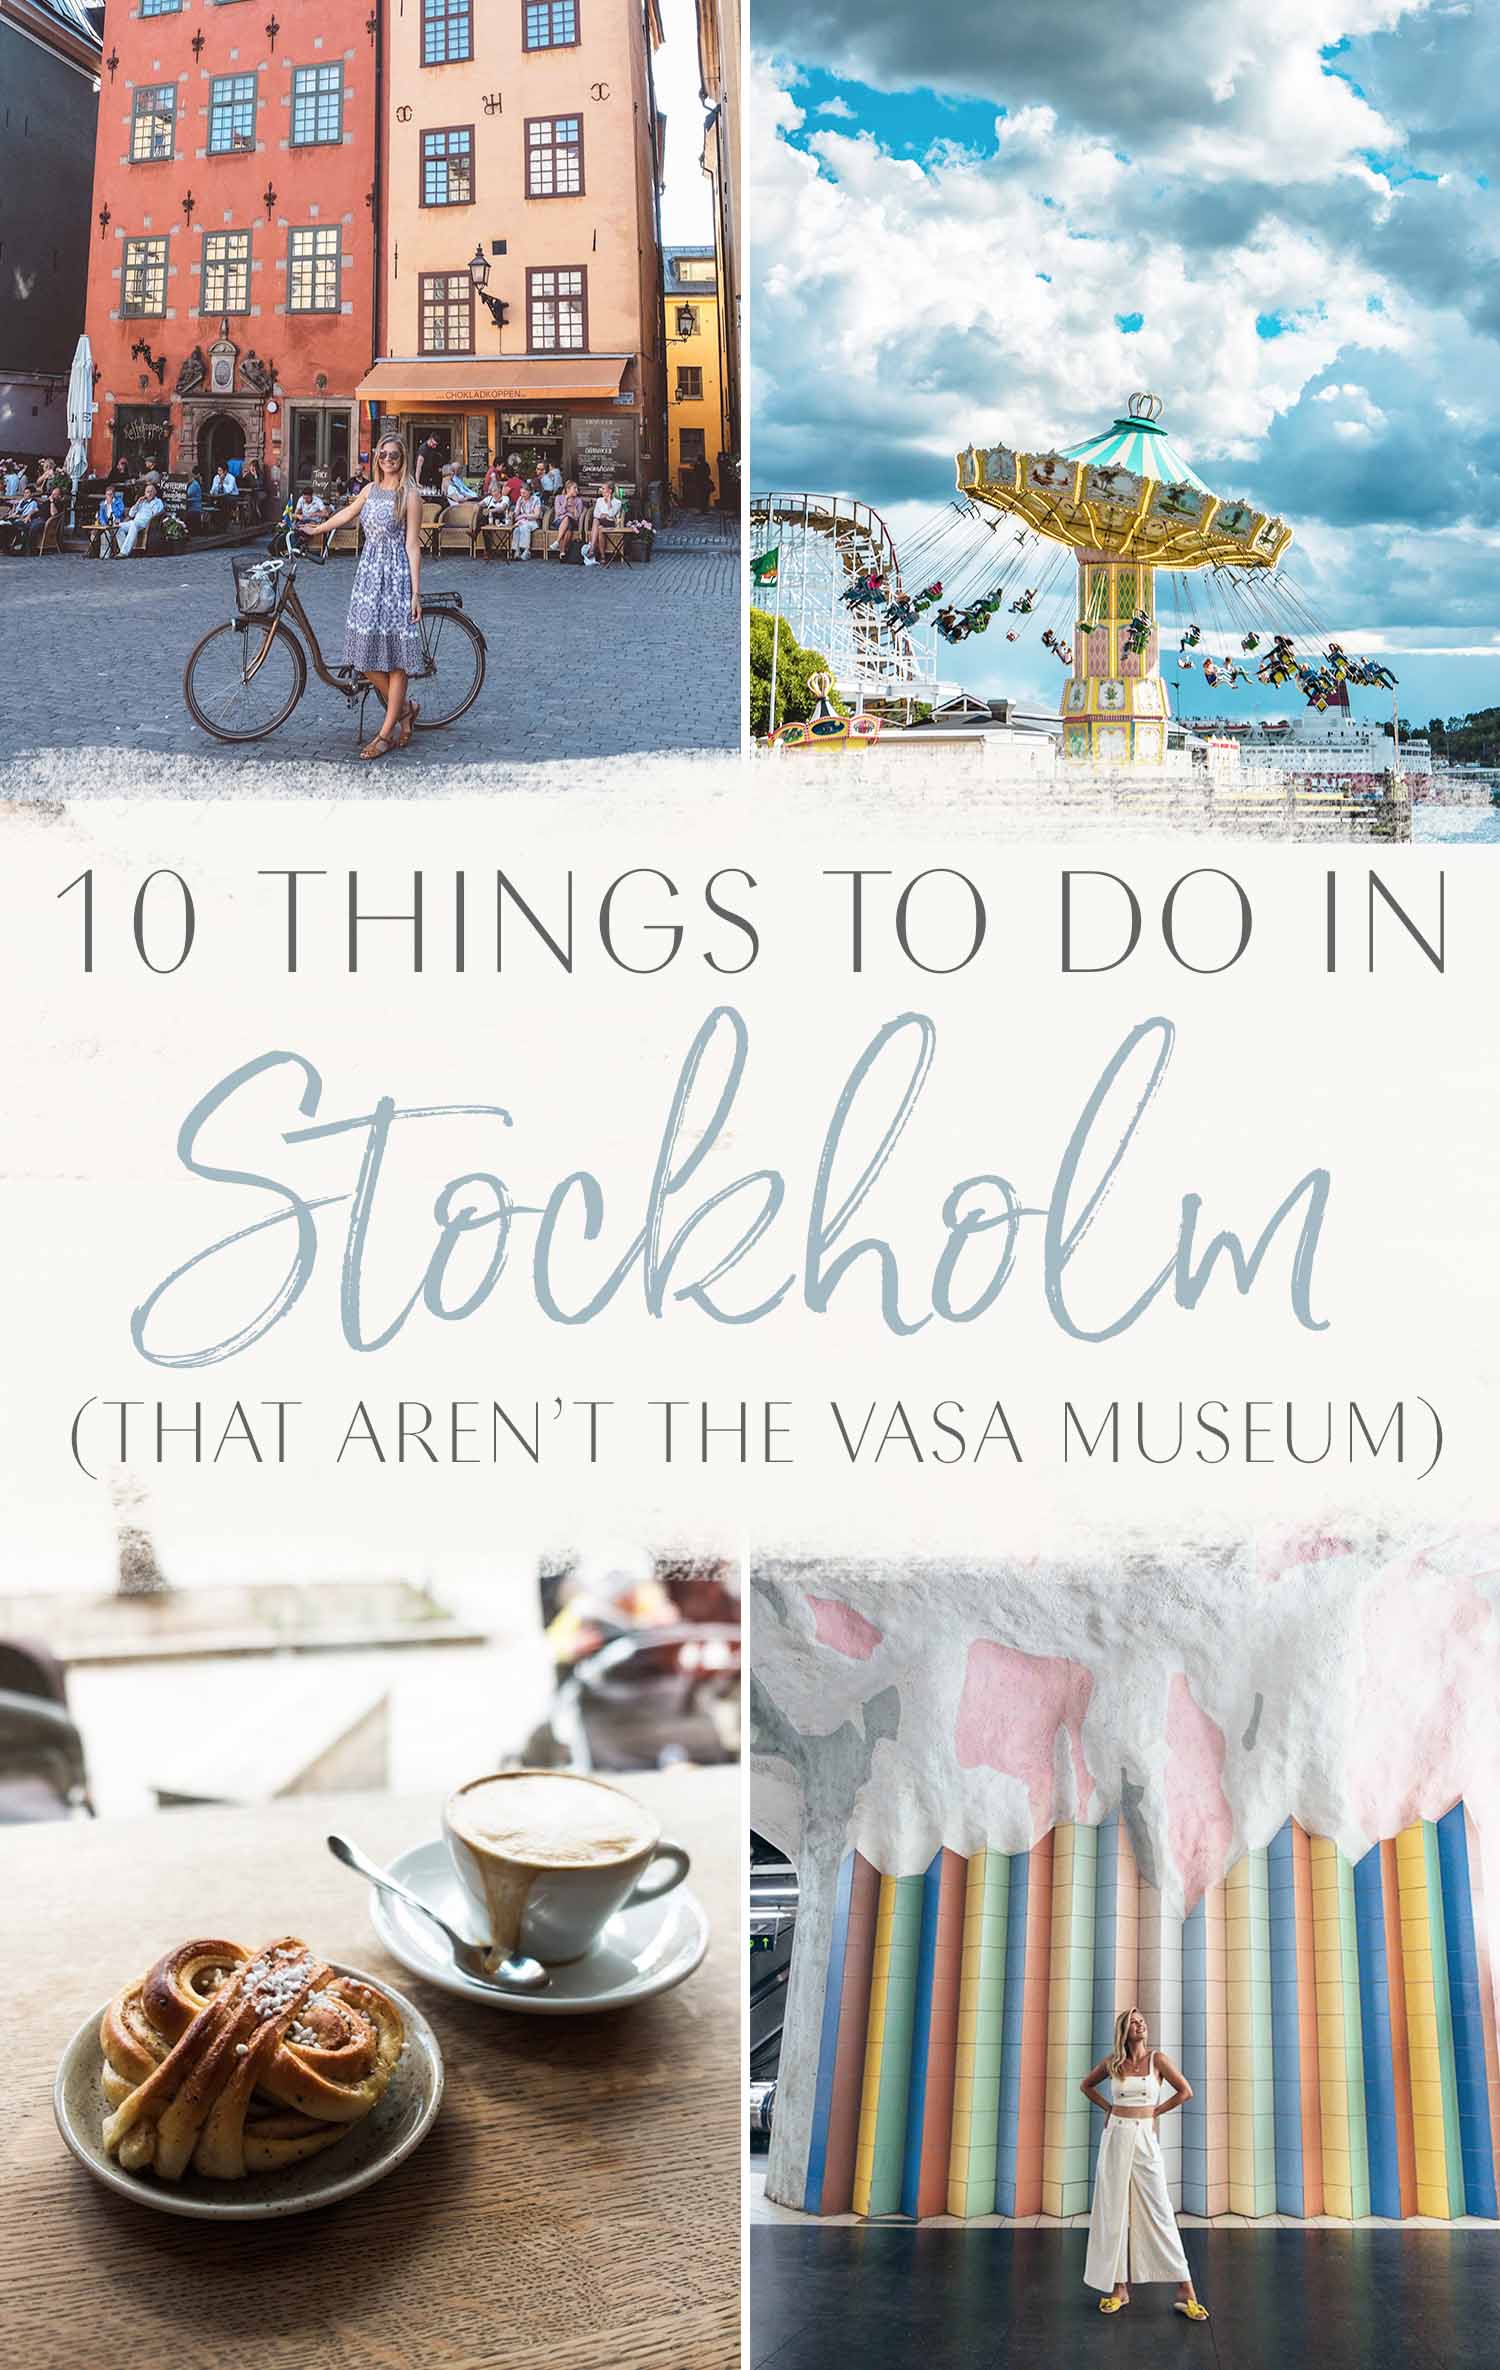 10 Things to Do in Stockholm Not Vasa Museum